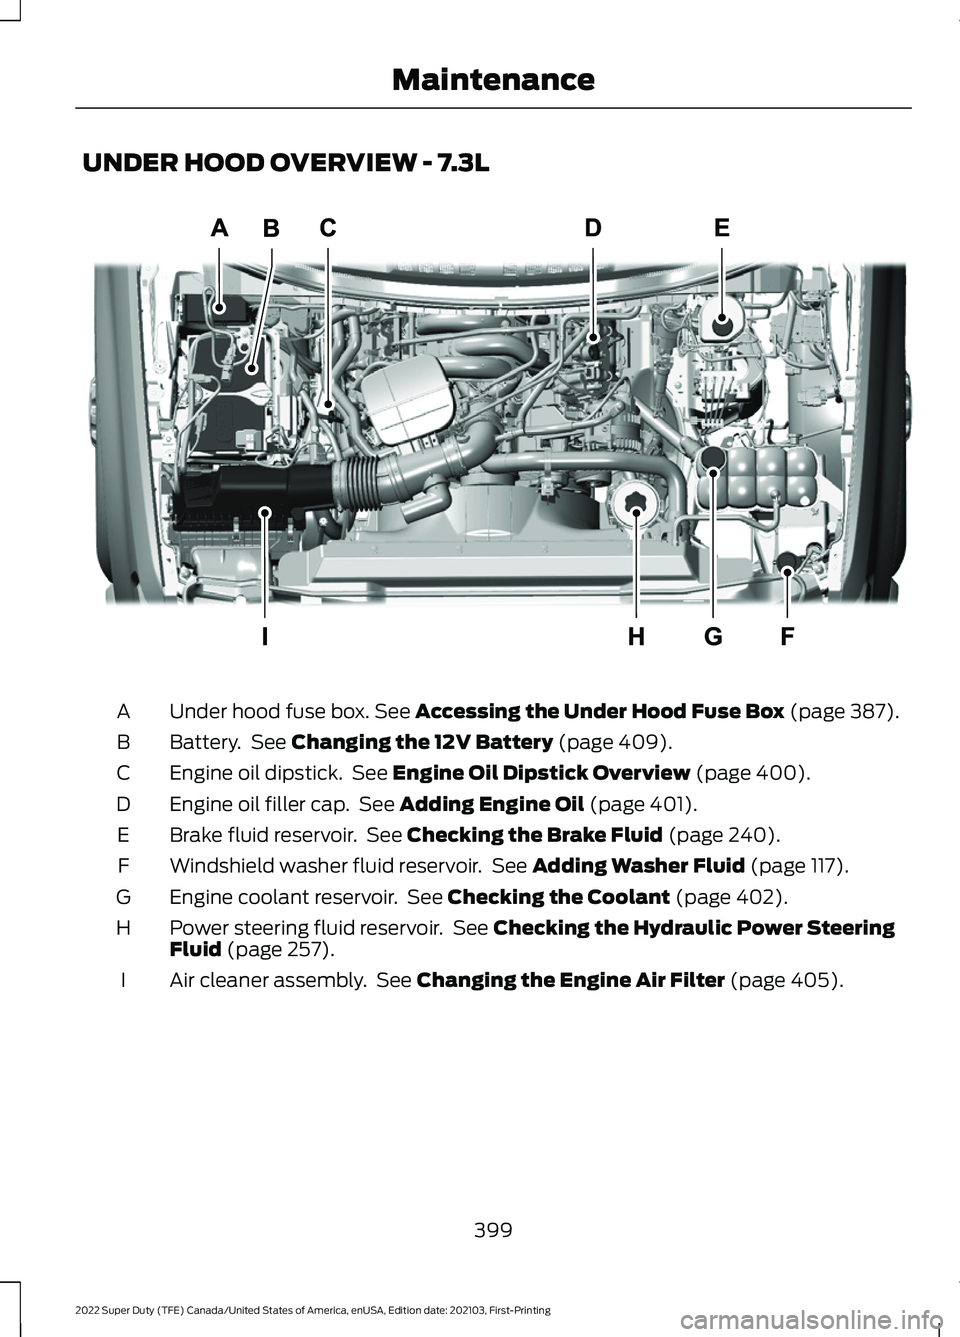 FORD F-550 2022  Owners Manual UNDER HOOD OVERVIEW - 7.3L
Under hood fuse box. See Accessing the Under Hood Fuse Box (page 387).
A
Battery.  See 
Changing the 12V Battery (page 409).
B
Engine oil dipstick.  See 
Engine Oil Dipstick